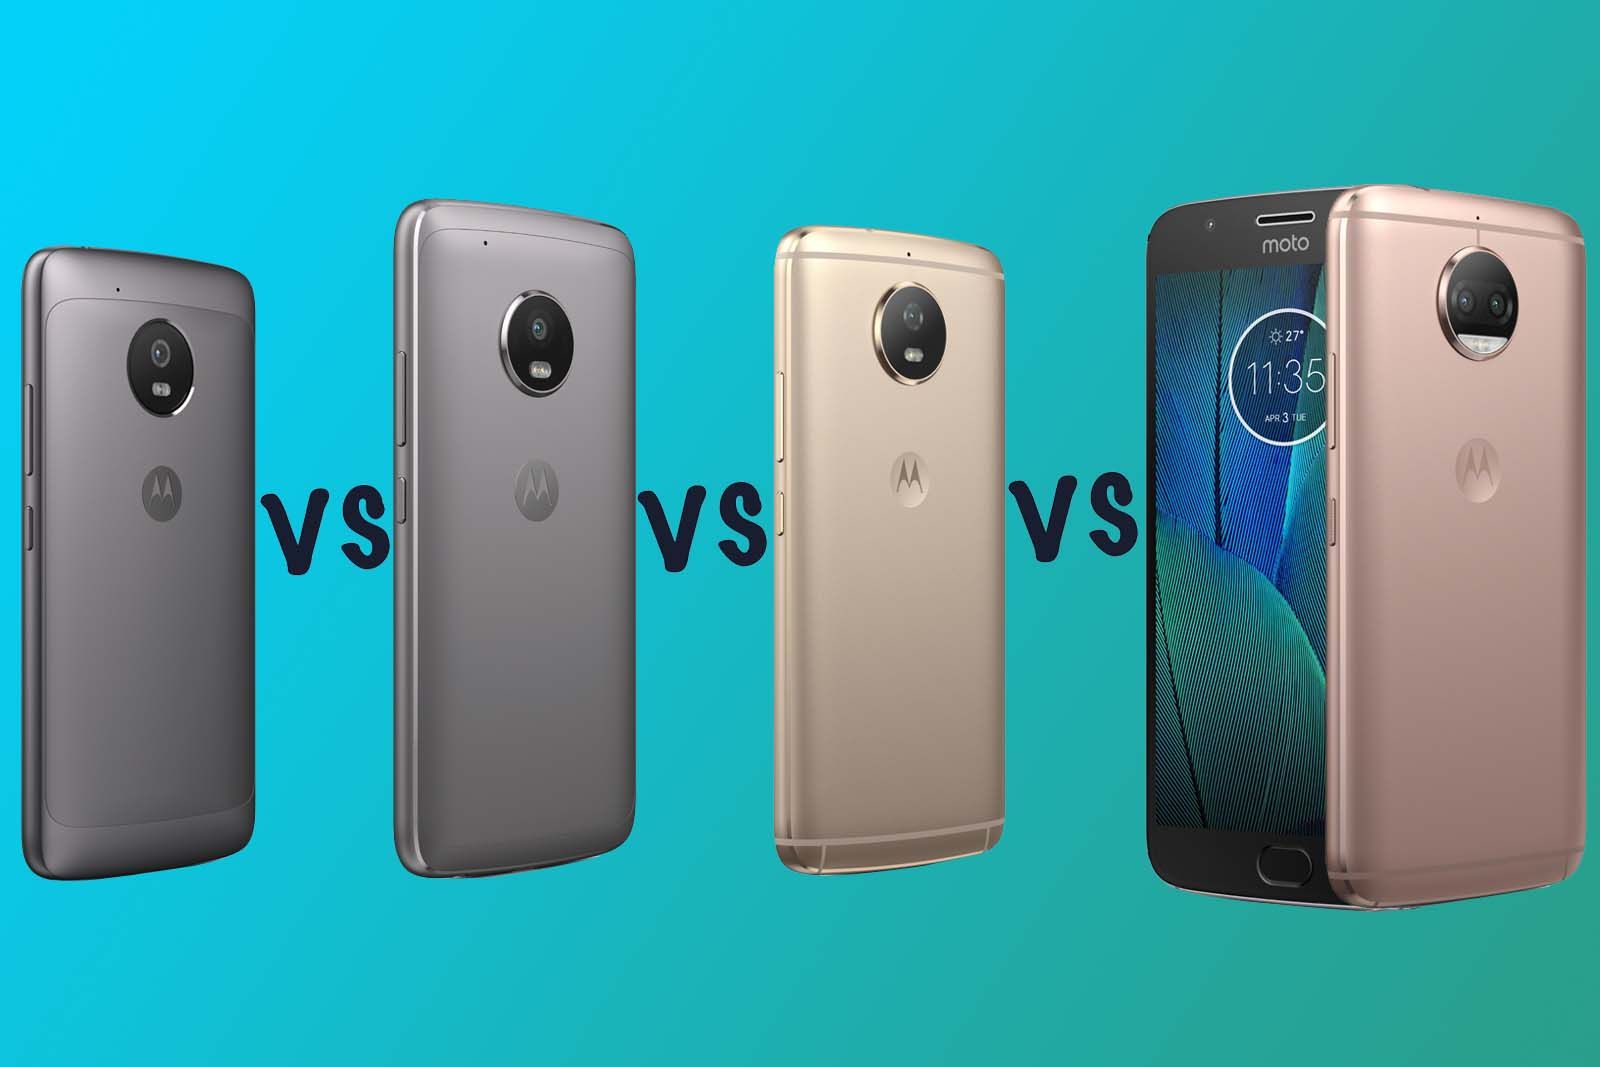 Motorola Moto G5 vs G5 Plus vs G5S vs G5S Plus: What are all these